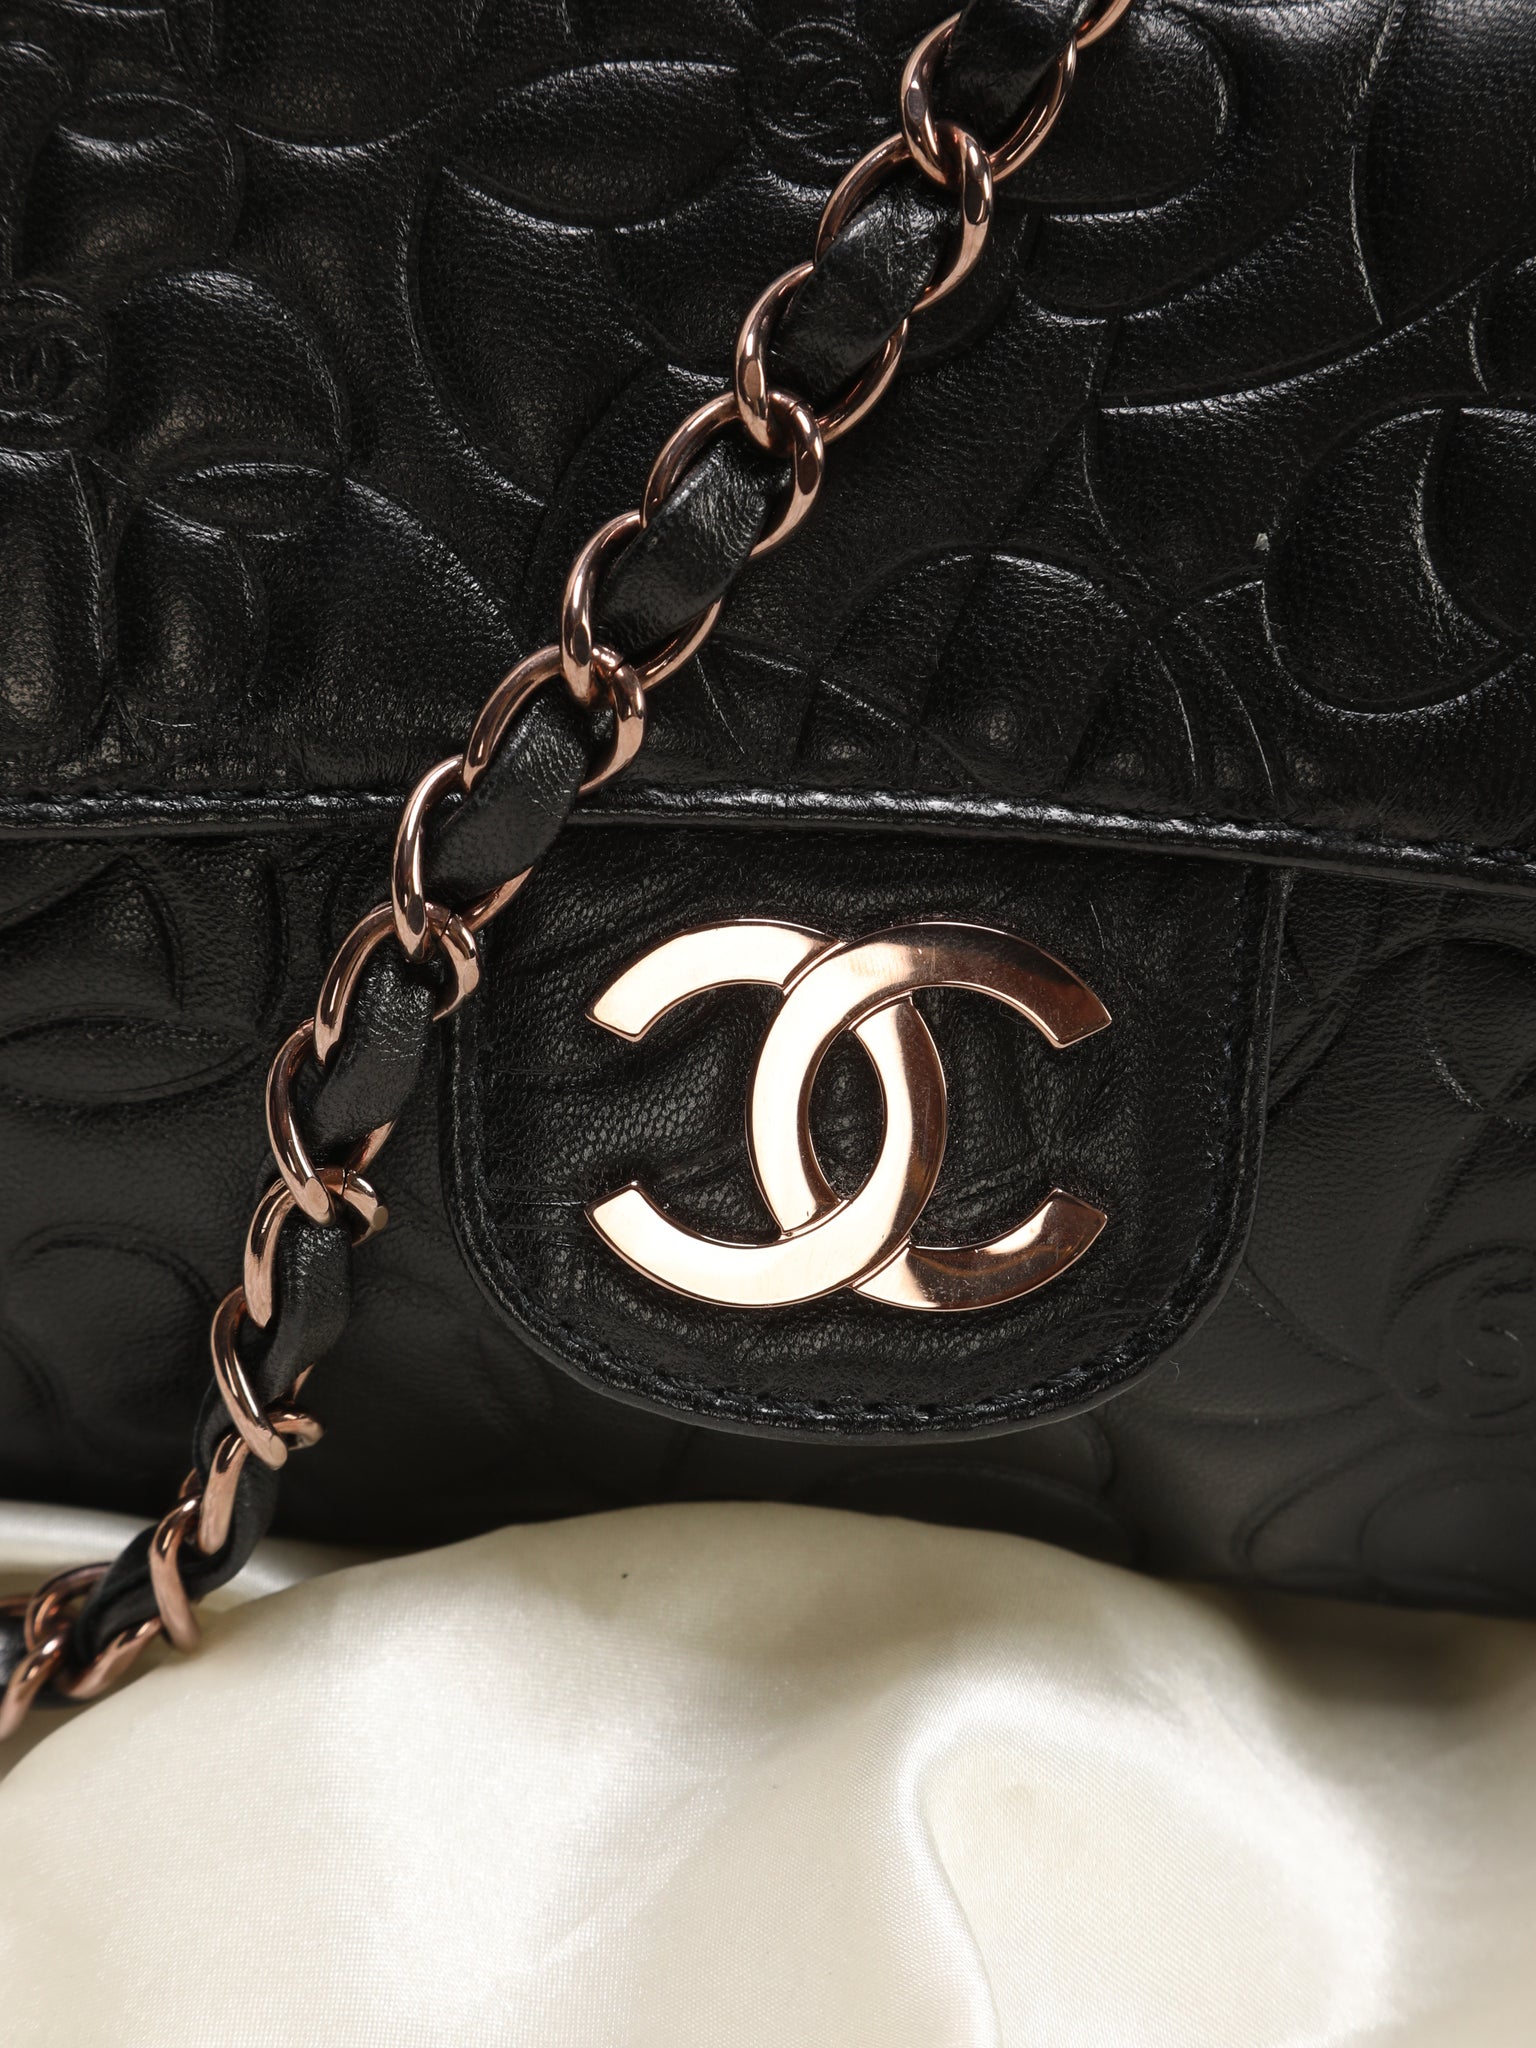 Extremely Rare Chanel Rose Gold Lambskin Camellia Flap Bag – SFN